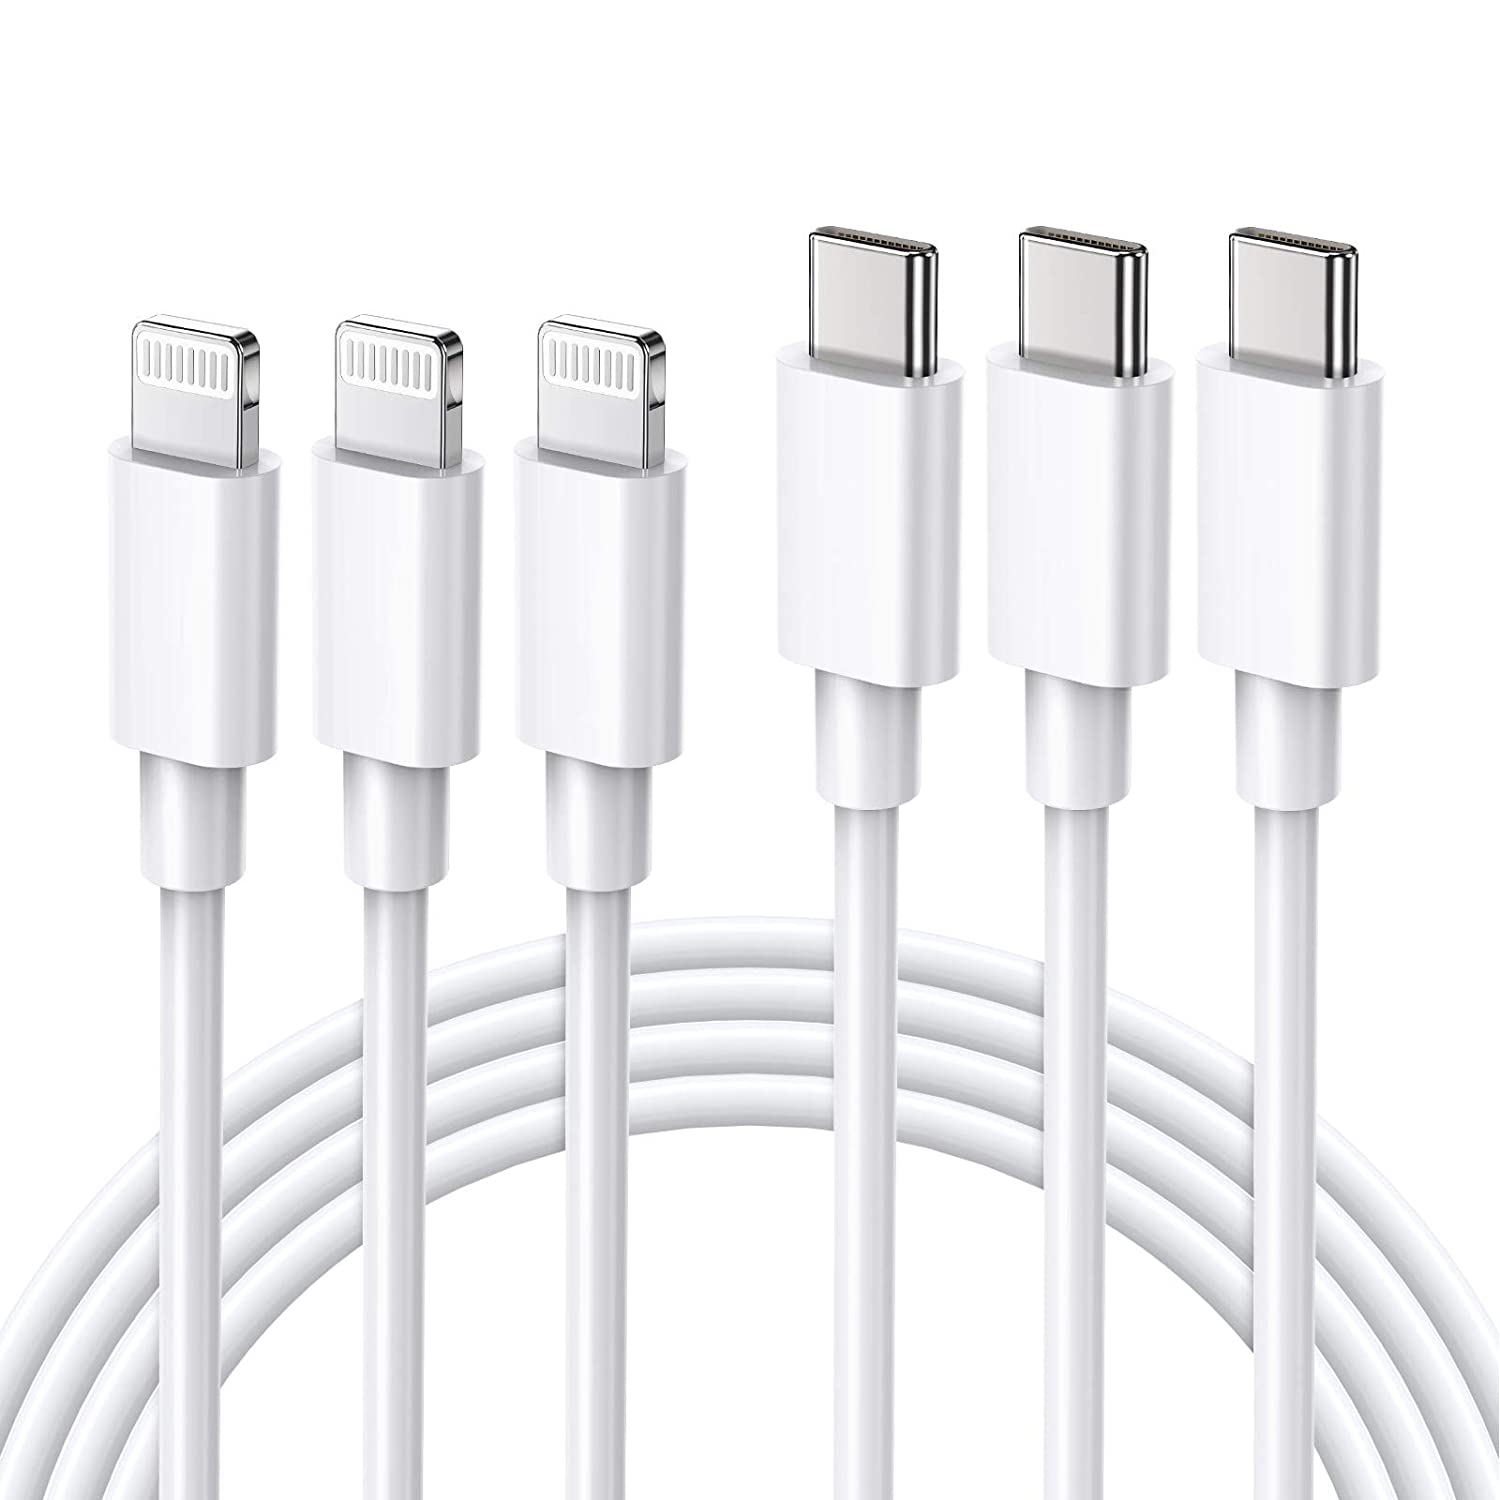 3-Pack 6FT Nikolable iPhone 12 Fast Charger Cable Type C to Lightning Cable (Supports Power Delivery) for iPhone $7.49 AC + FSSS